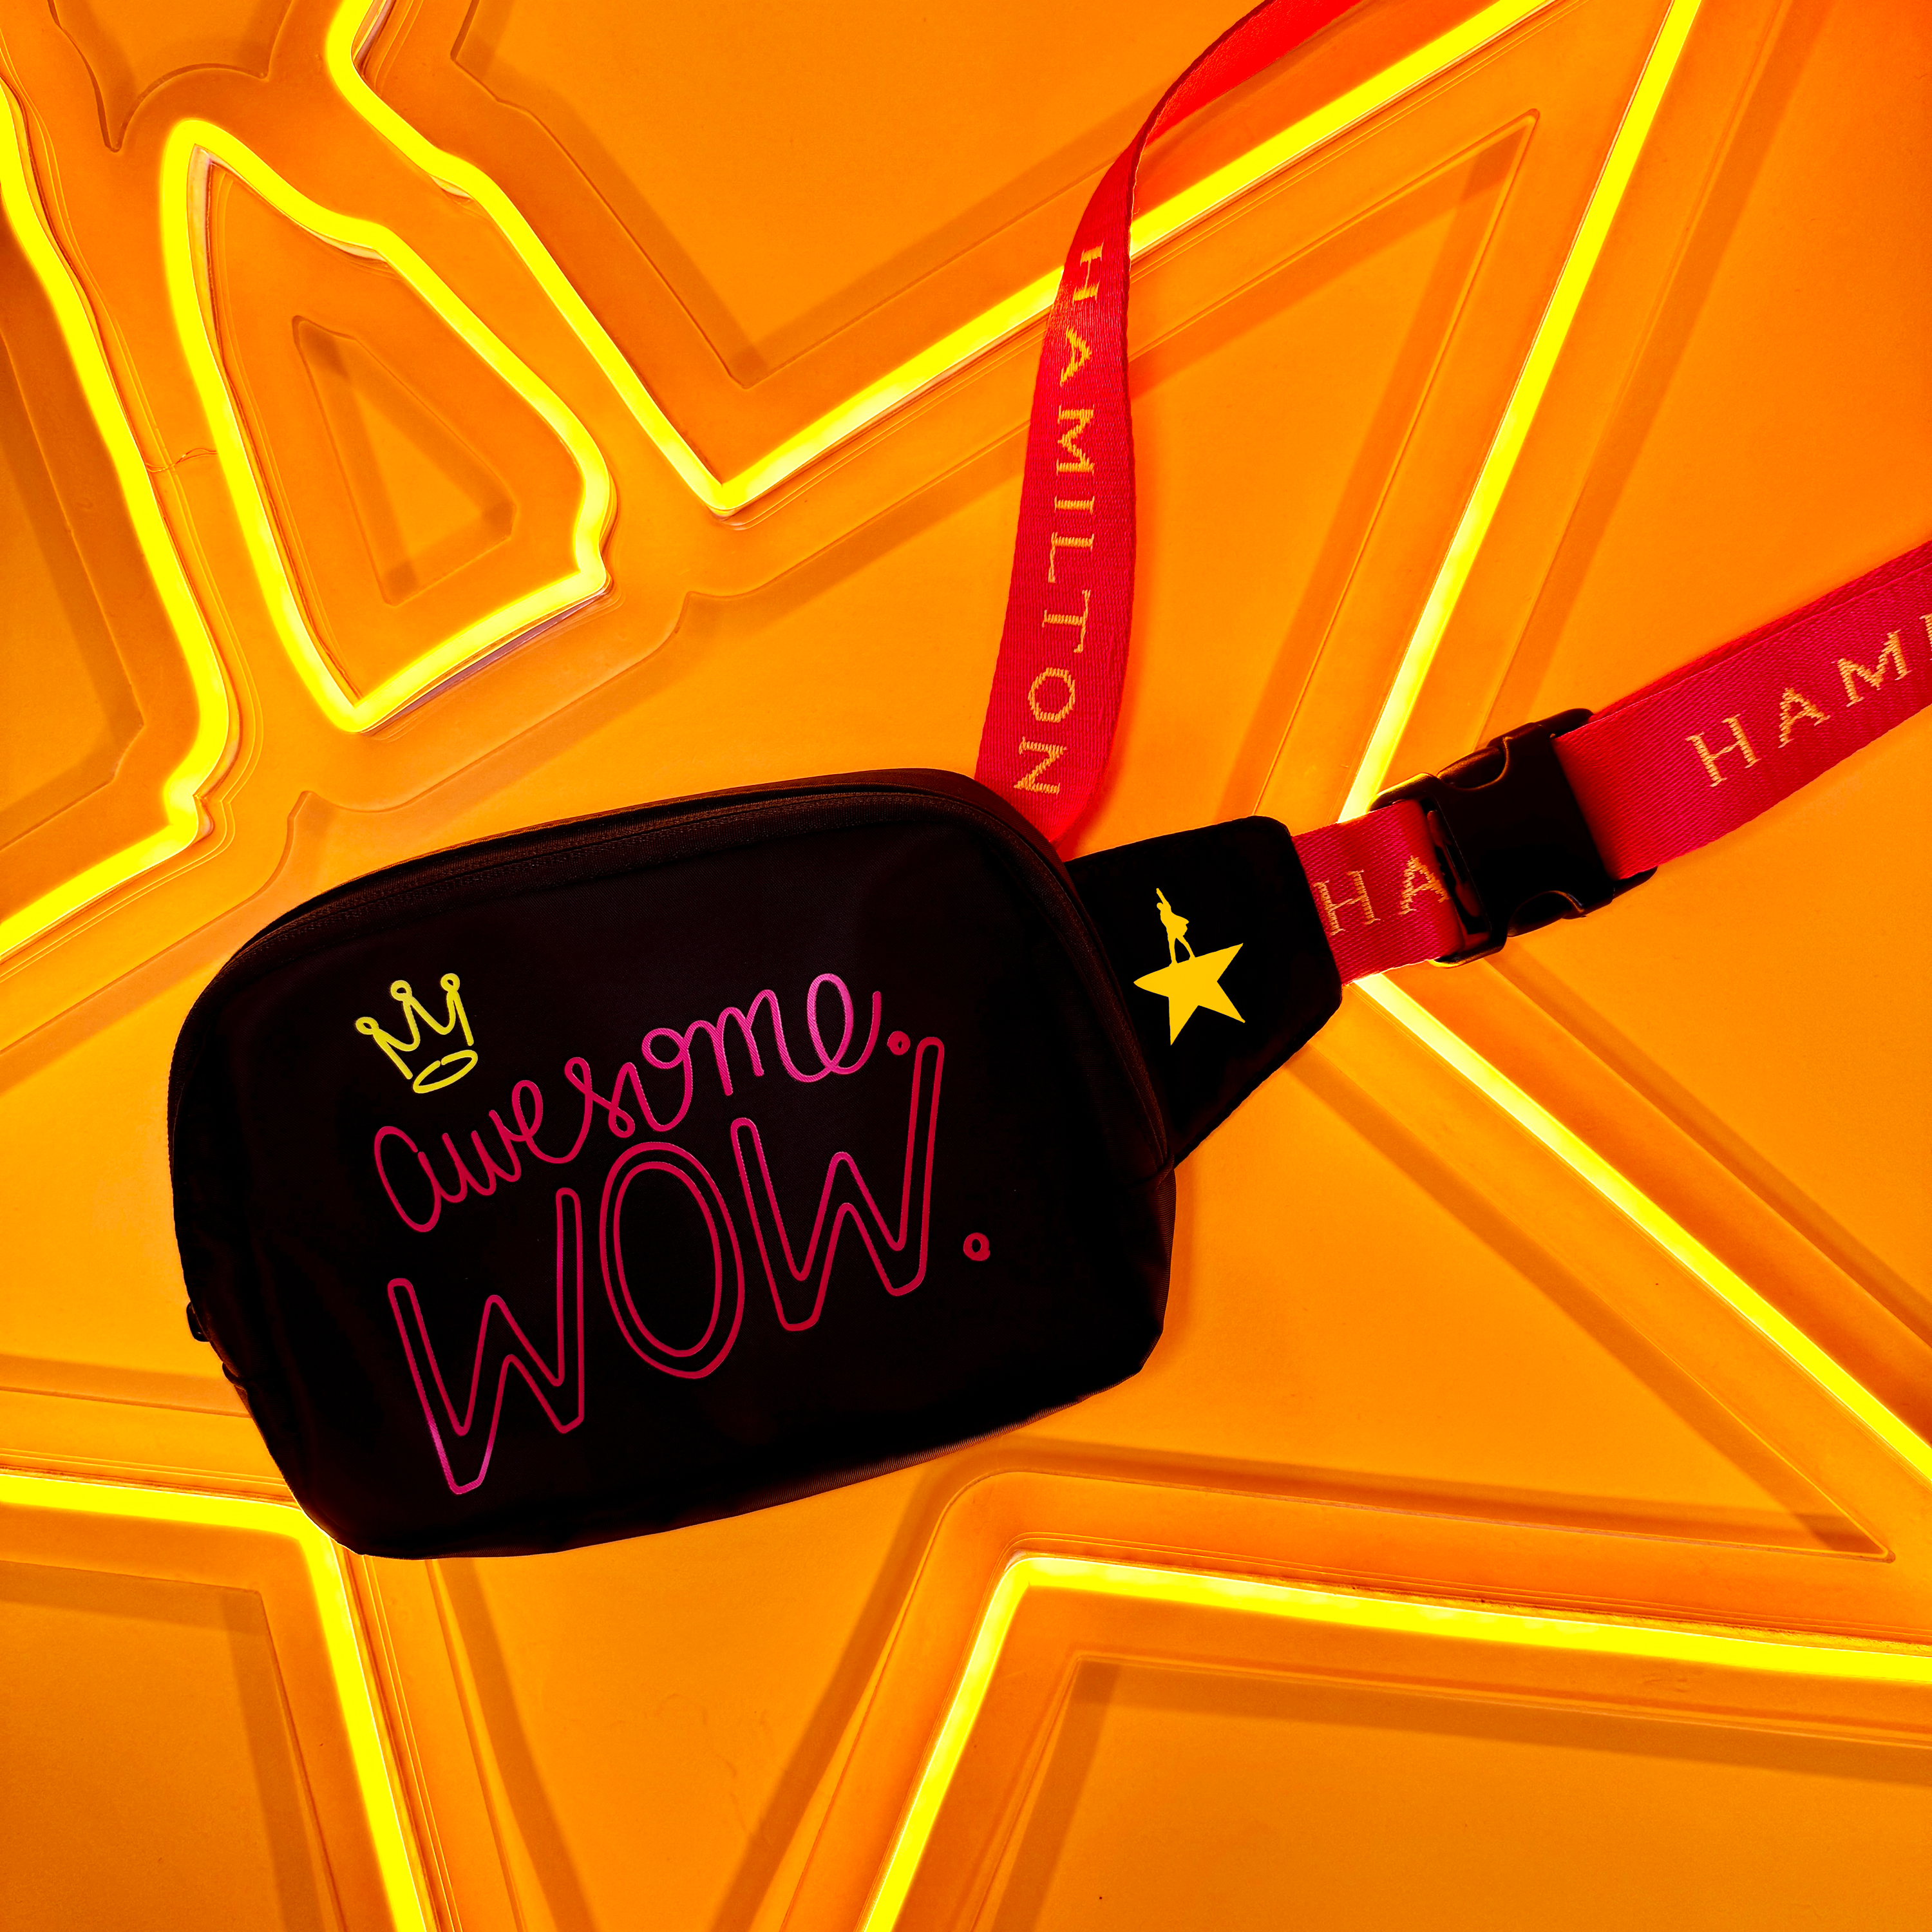 HAMILTON Awesome Wow Fanny Pack Image